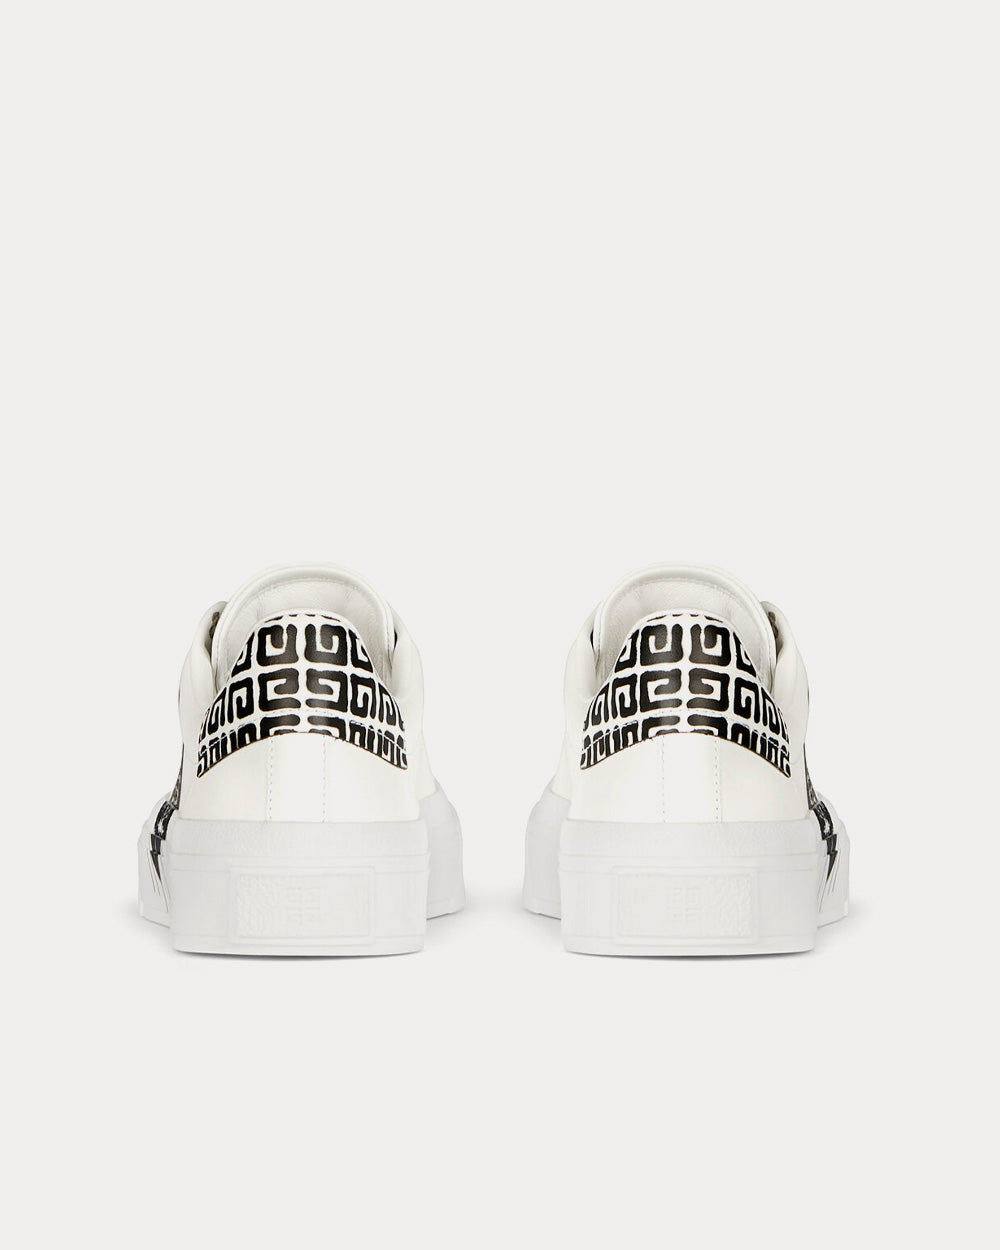 Givenchy - x Chito Tag Effect 4G Print Leather White Low Top Sneakers